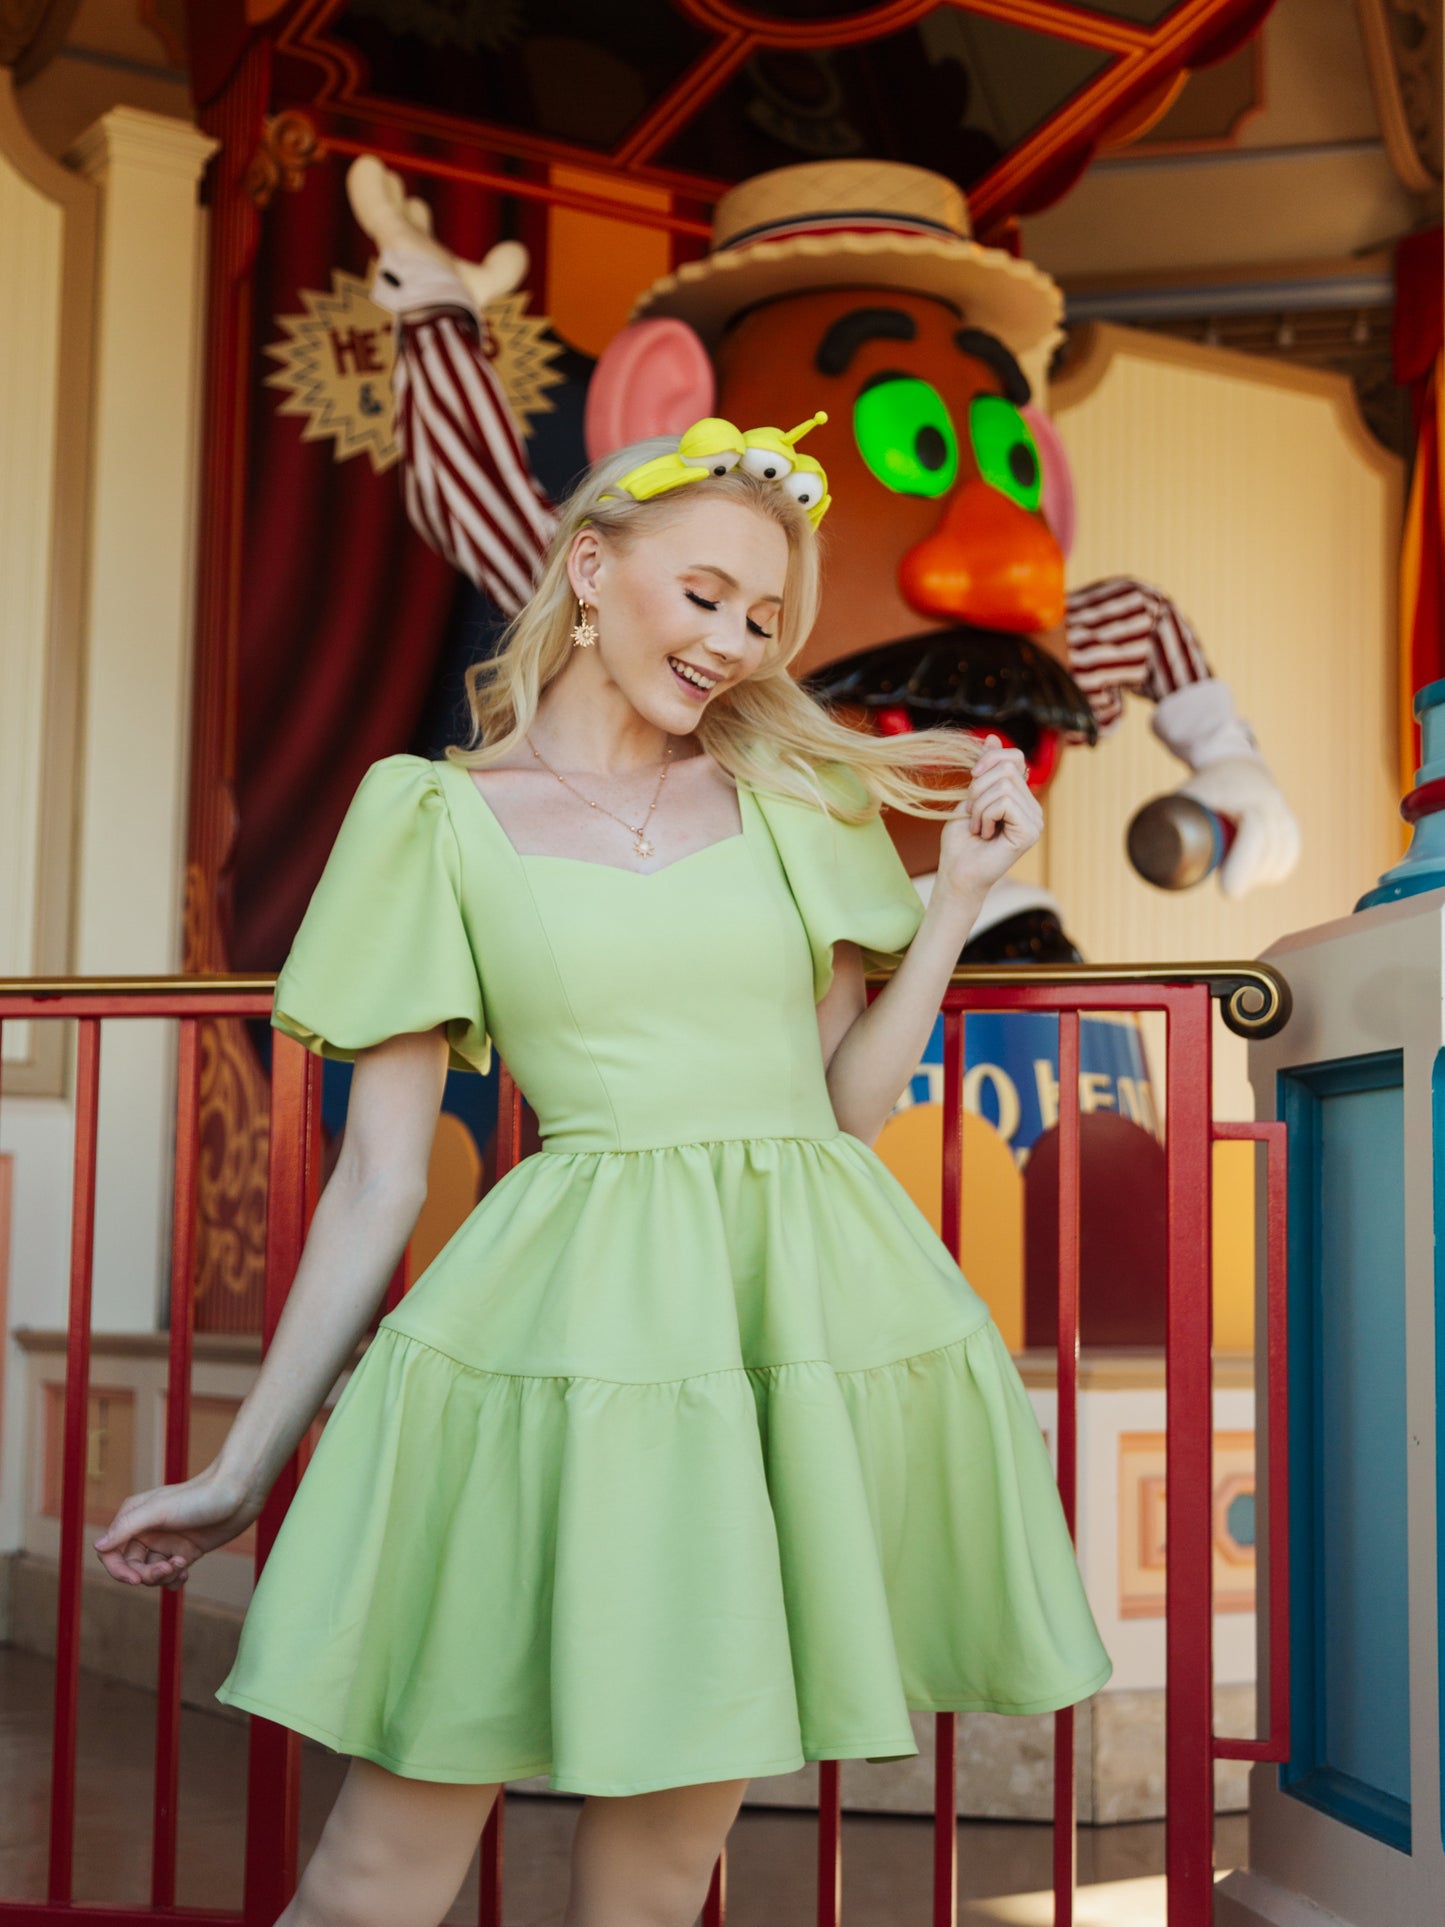 *PRE-ORDER* The Princess Puff Dress in Pixie Green